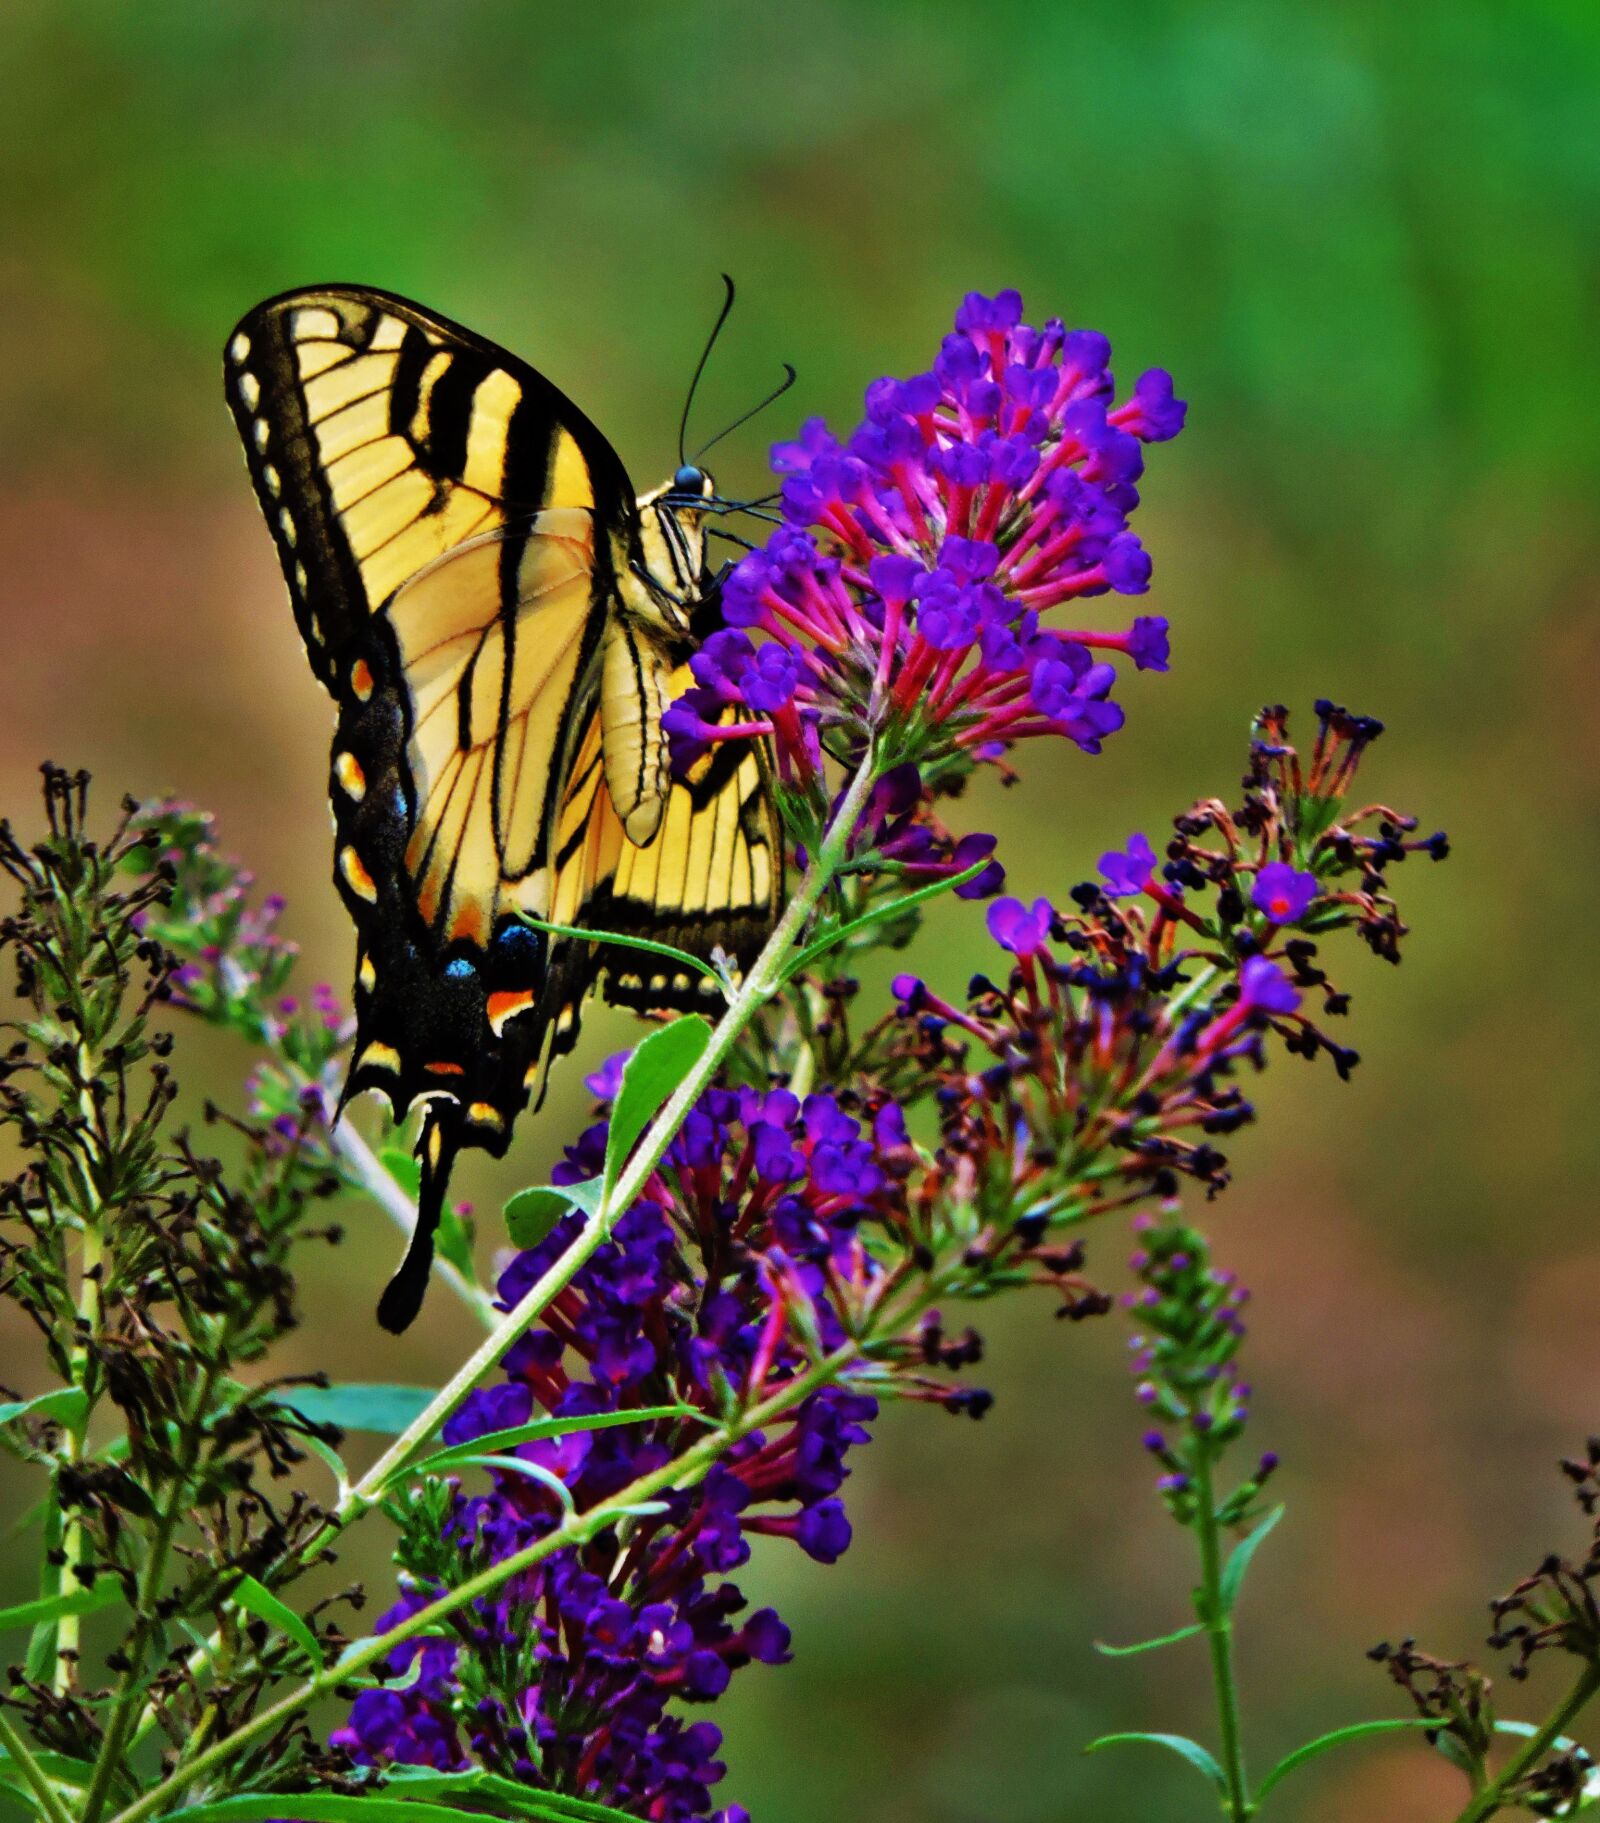 Nikon Coolpix P600 sample photo. Swallowtail, butterfly, nature photography